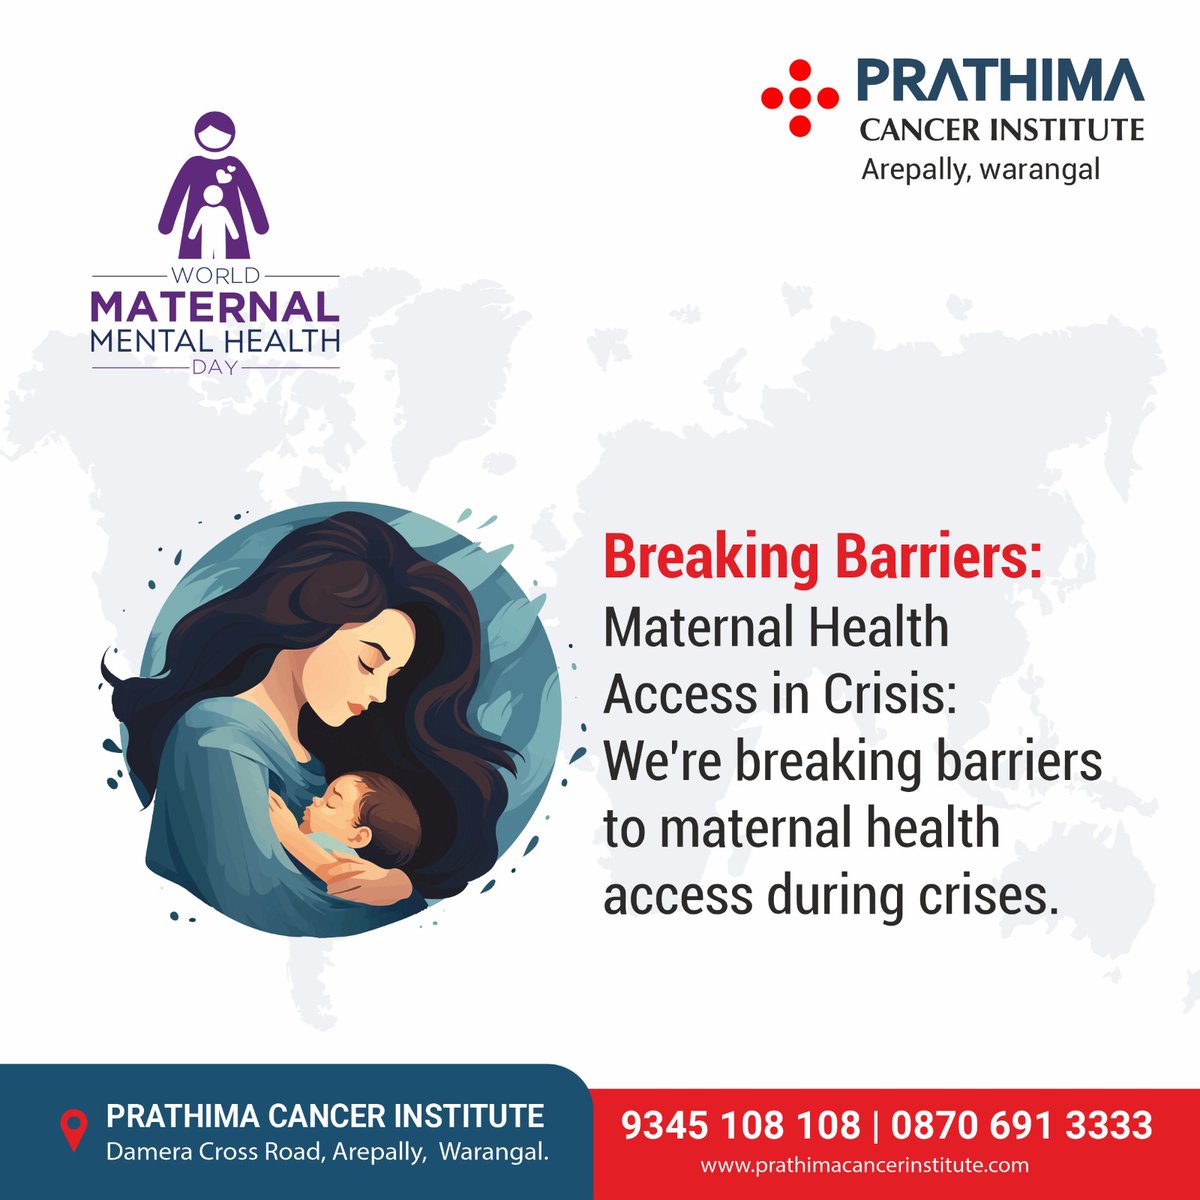 𝐖𝐨𝐫𝐥𝐝 𝐌𝐚𝐭𝐞𝐫𝐧𝐚𝐥 𝐌𝐞𝐧𝐭𝐚𝐥 𝐇𝐞𝐚𝐥𝐭𝐡 𝐃𝐚𝐲!

Supporting Mental Health in Motherhood:
Accessible mental health care is essential for mothers facing challenges

#MaternalMentalHealth #WorldMaternalMentalHealth #PerinatalMentalHealth #prathimacancerinstitute #PCI